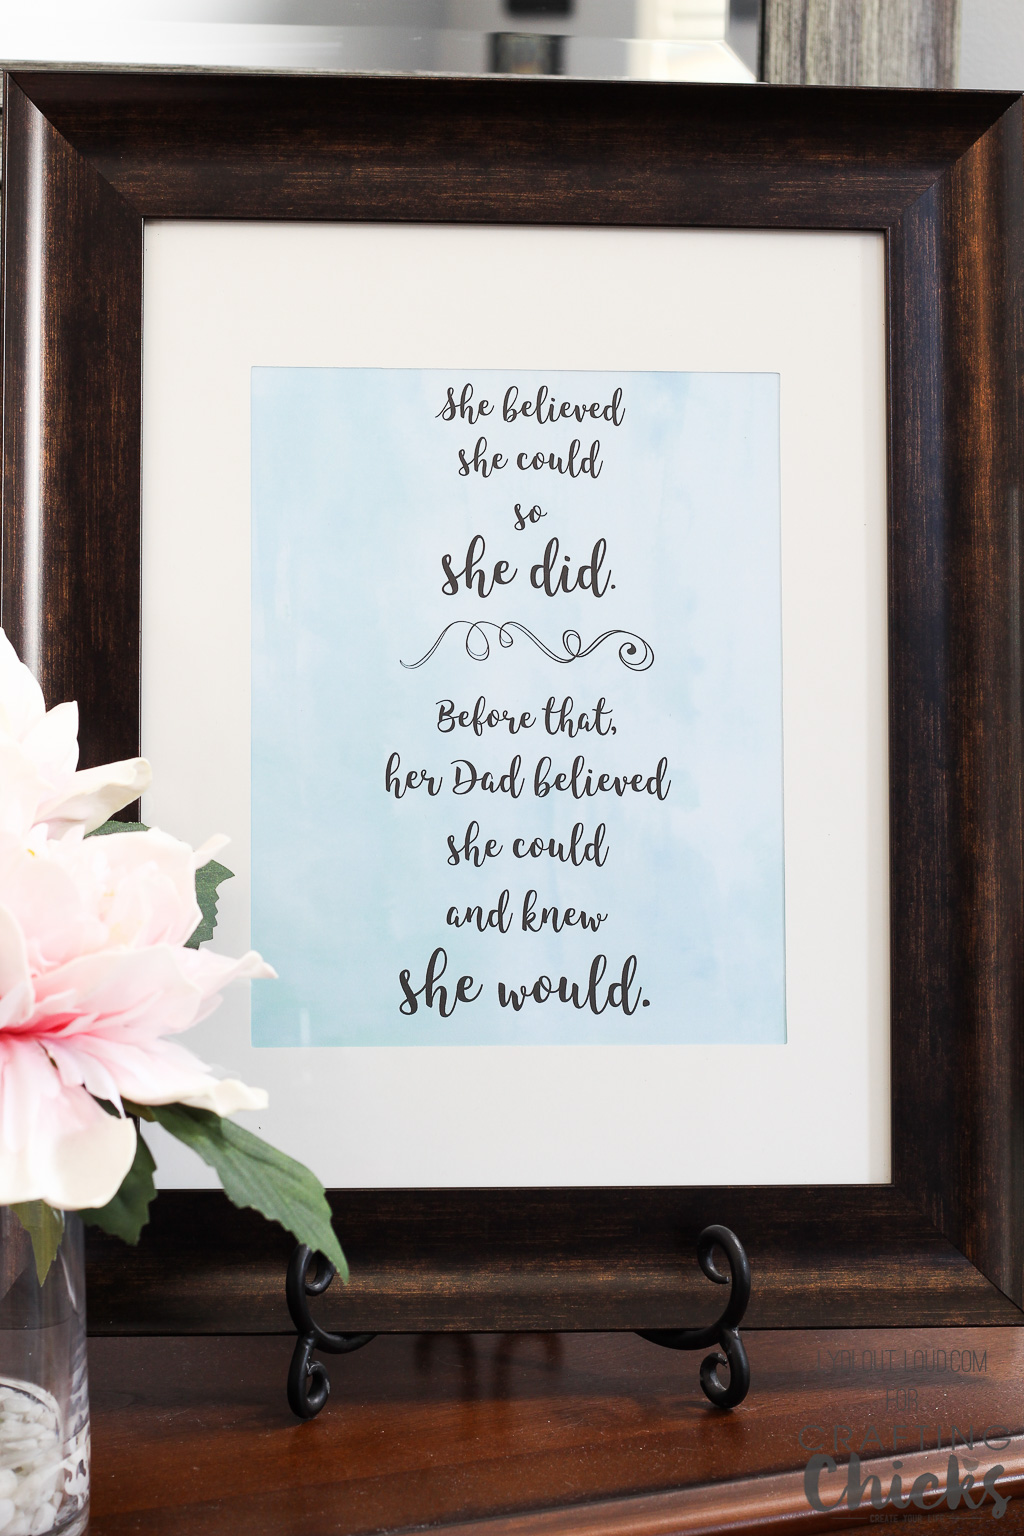 http://thecraftingchicks.com/wp-content/uploads/2017/05/fathers-day-printable-art-5742.jpg